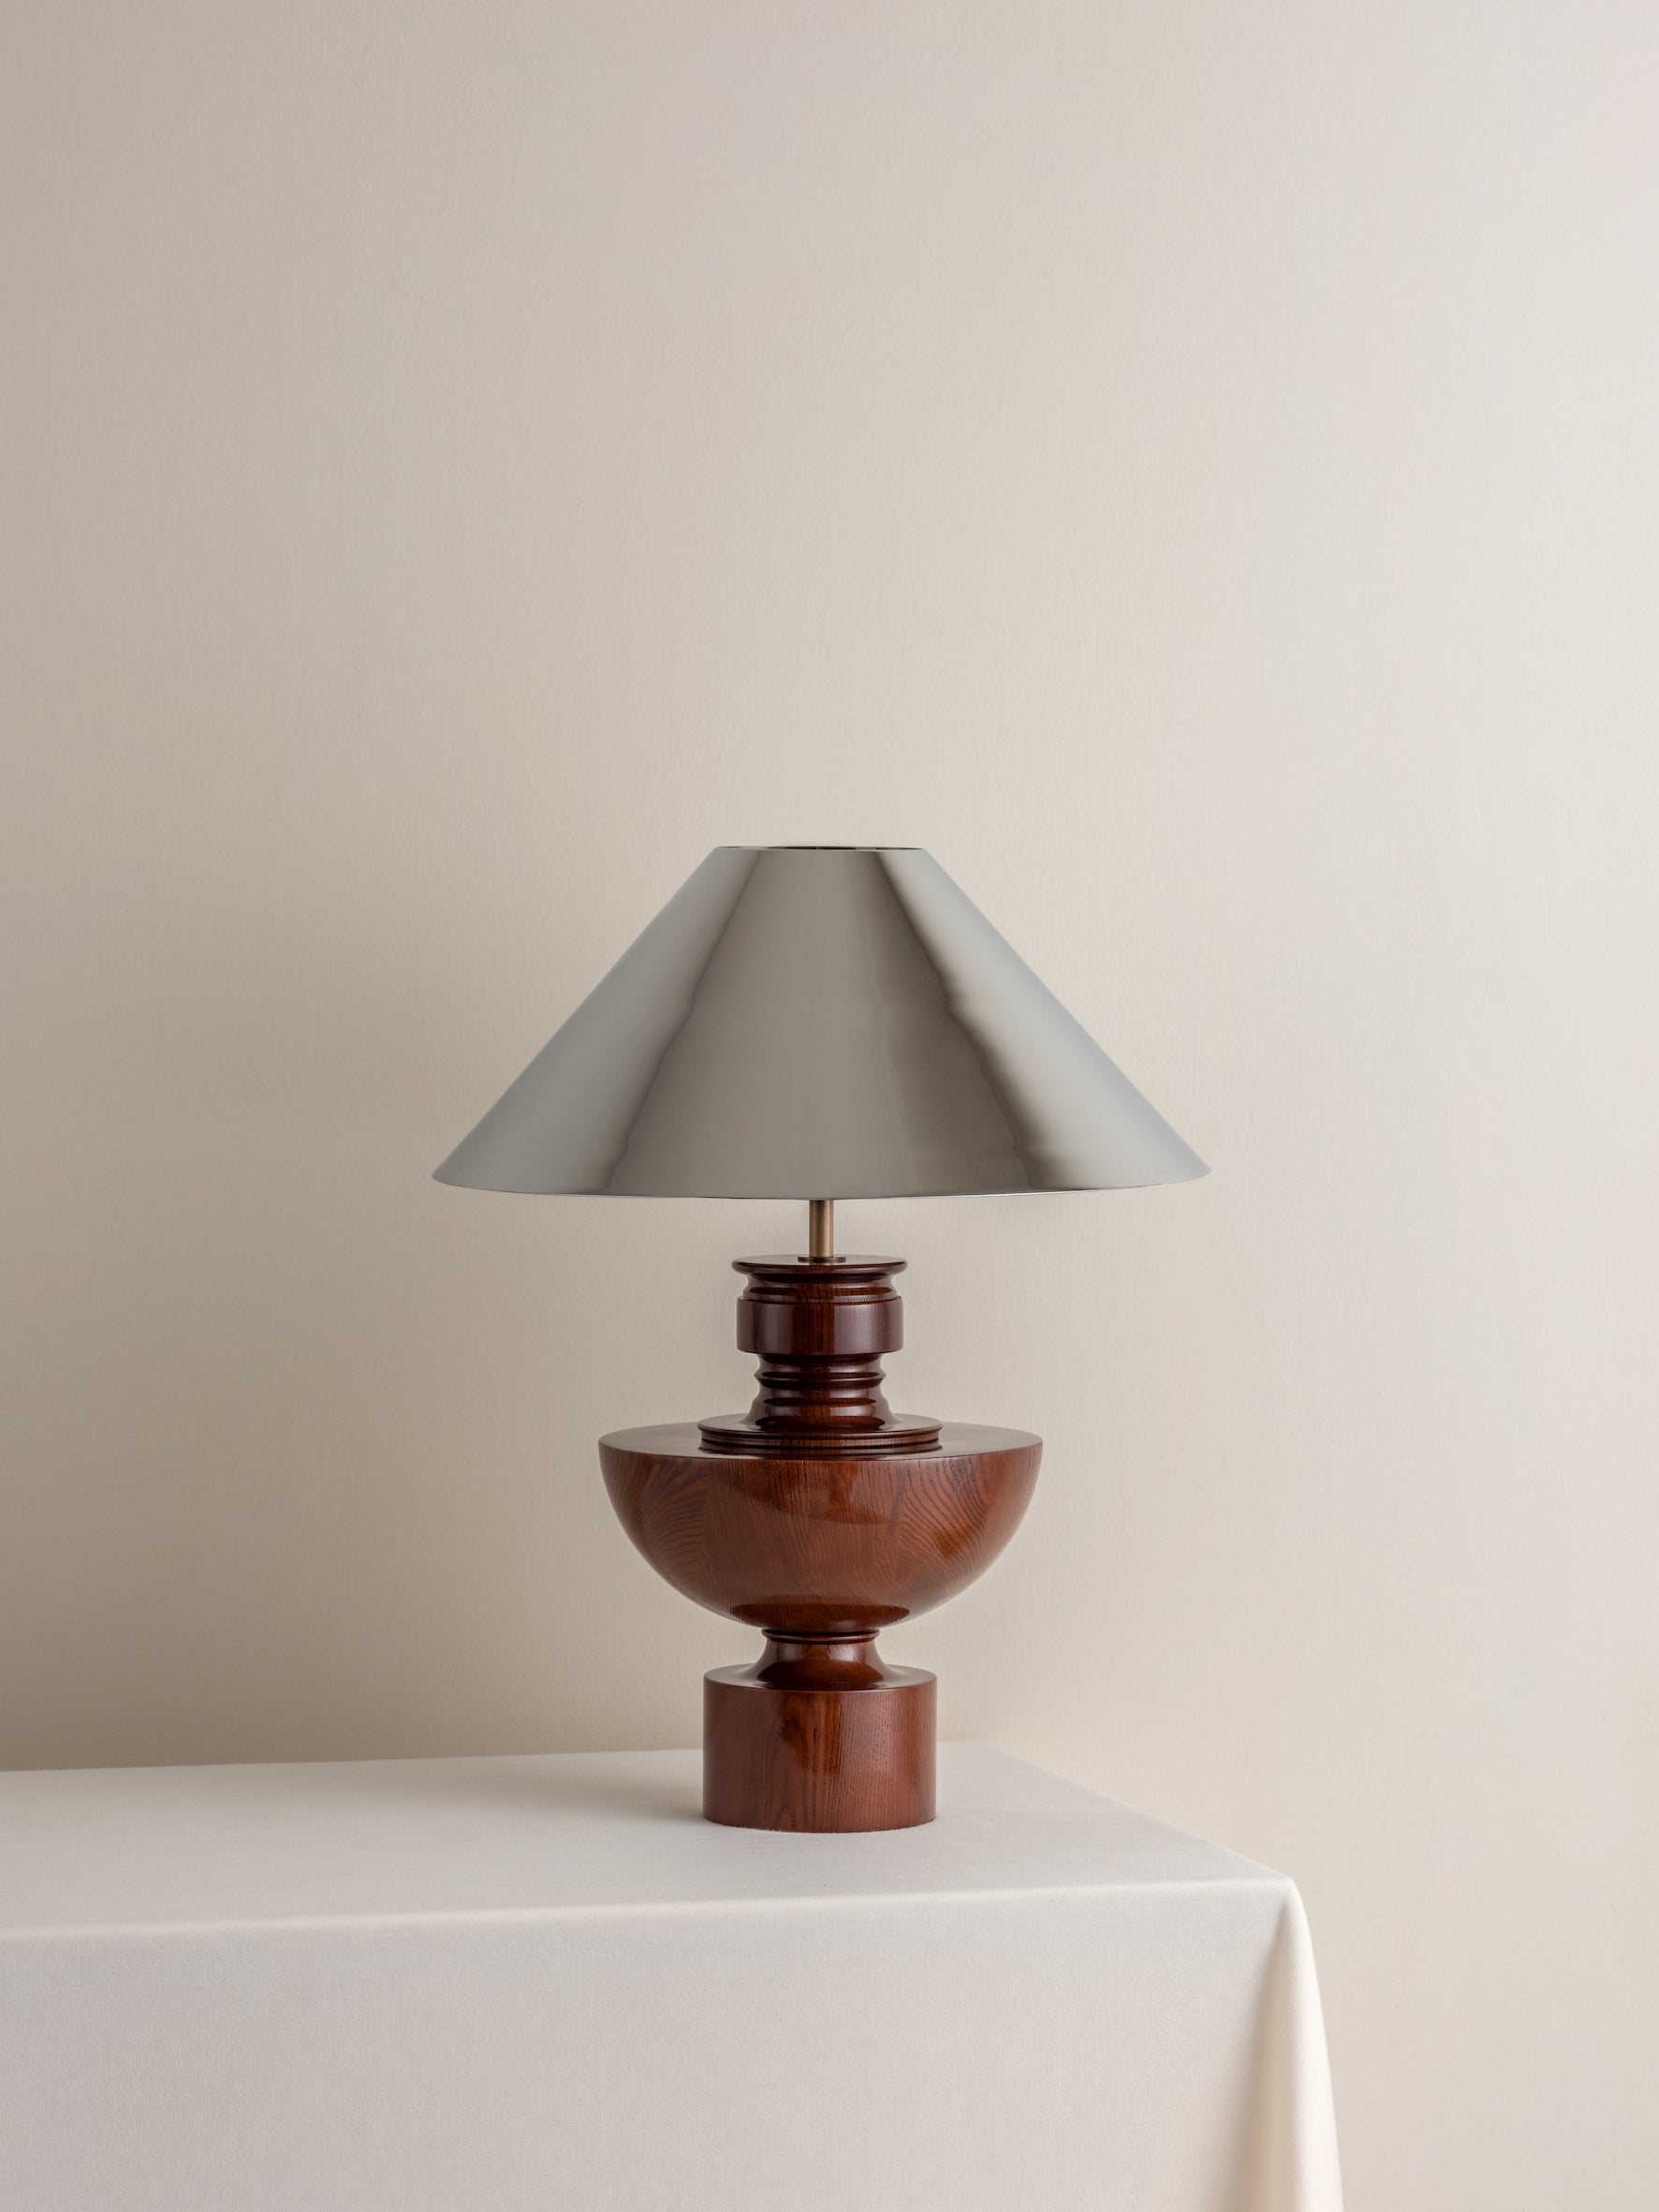 Editions spun wood lamp with + chrome shade | Table Lamp | Lights & Lamps | UK | Modern Affordable Designer Lighting